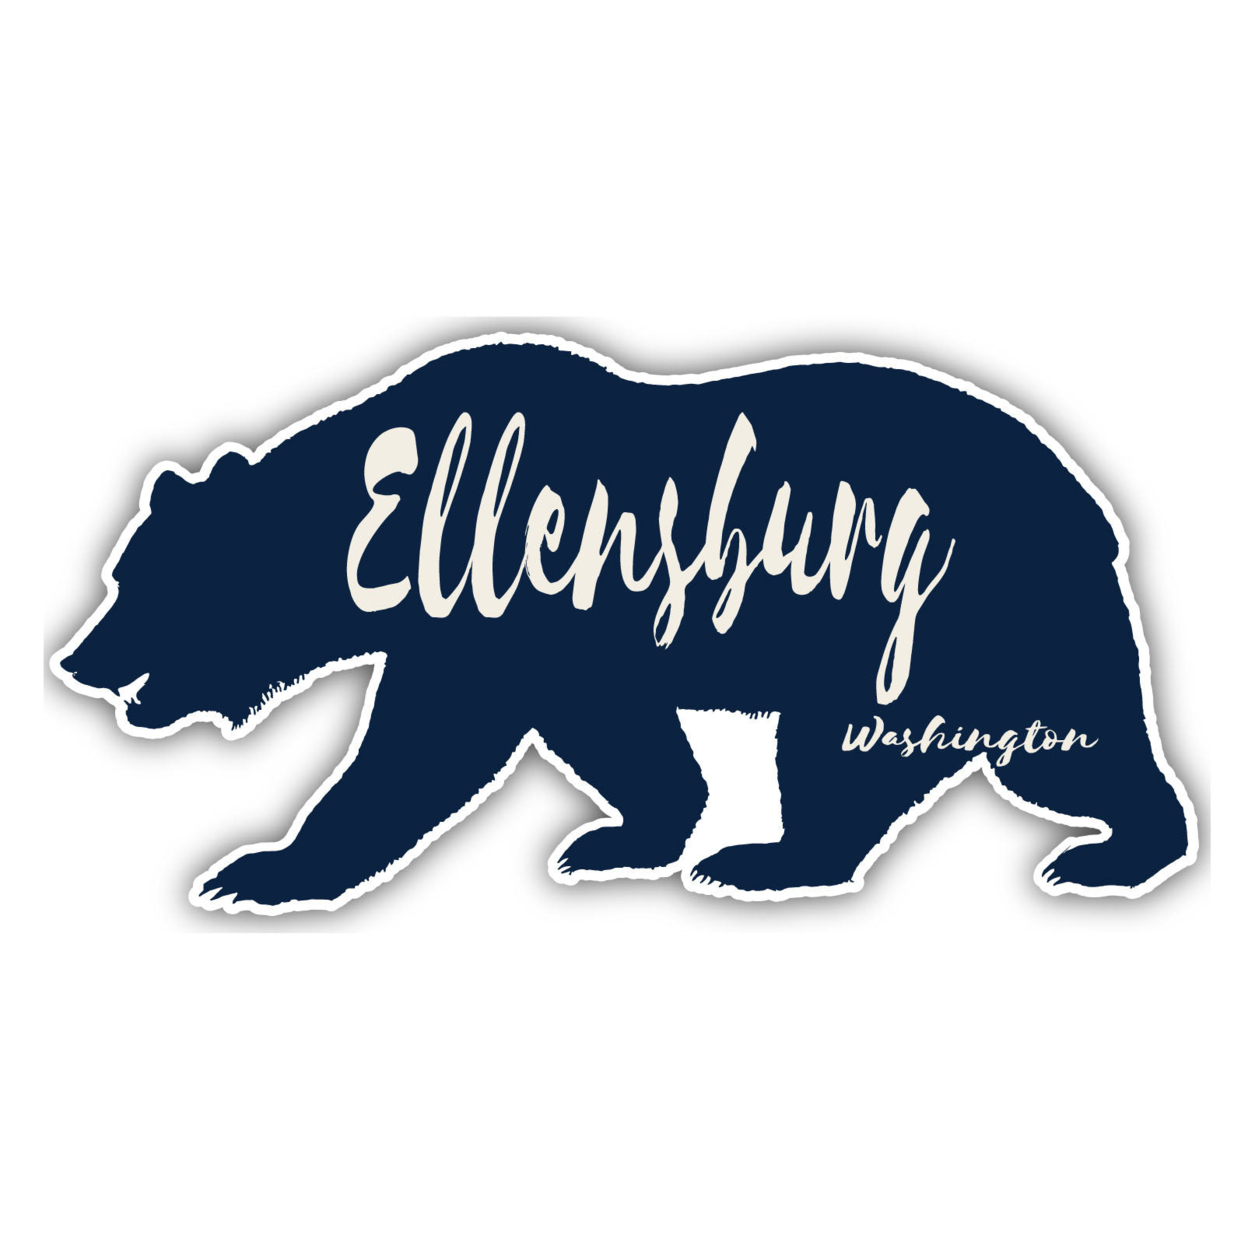 Ellensburg Washington Souvenir Decorative Stickers (Choose Theme And Size) - 4-Pack, 6-Inch, Great Outdoors